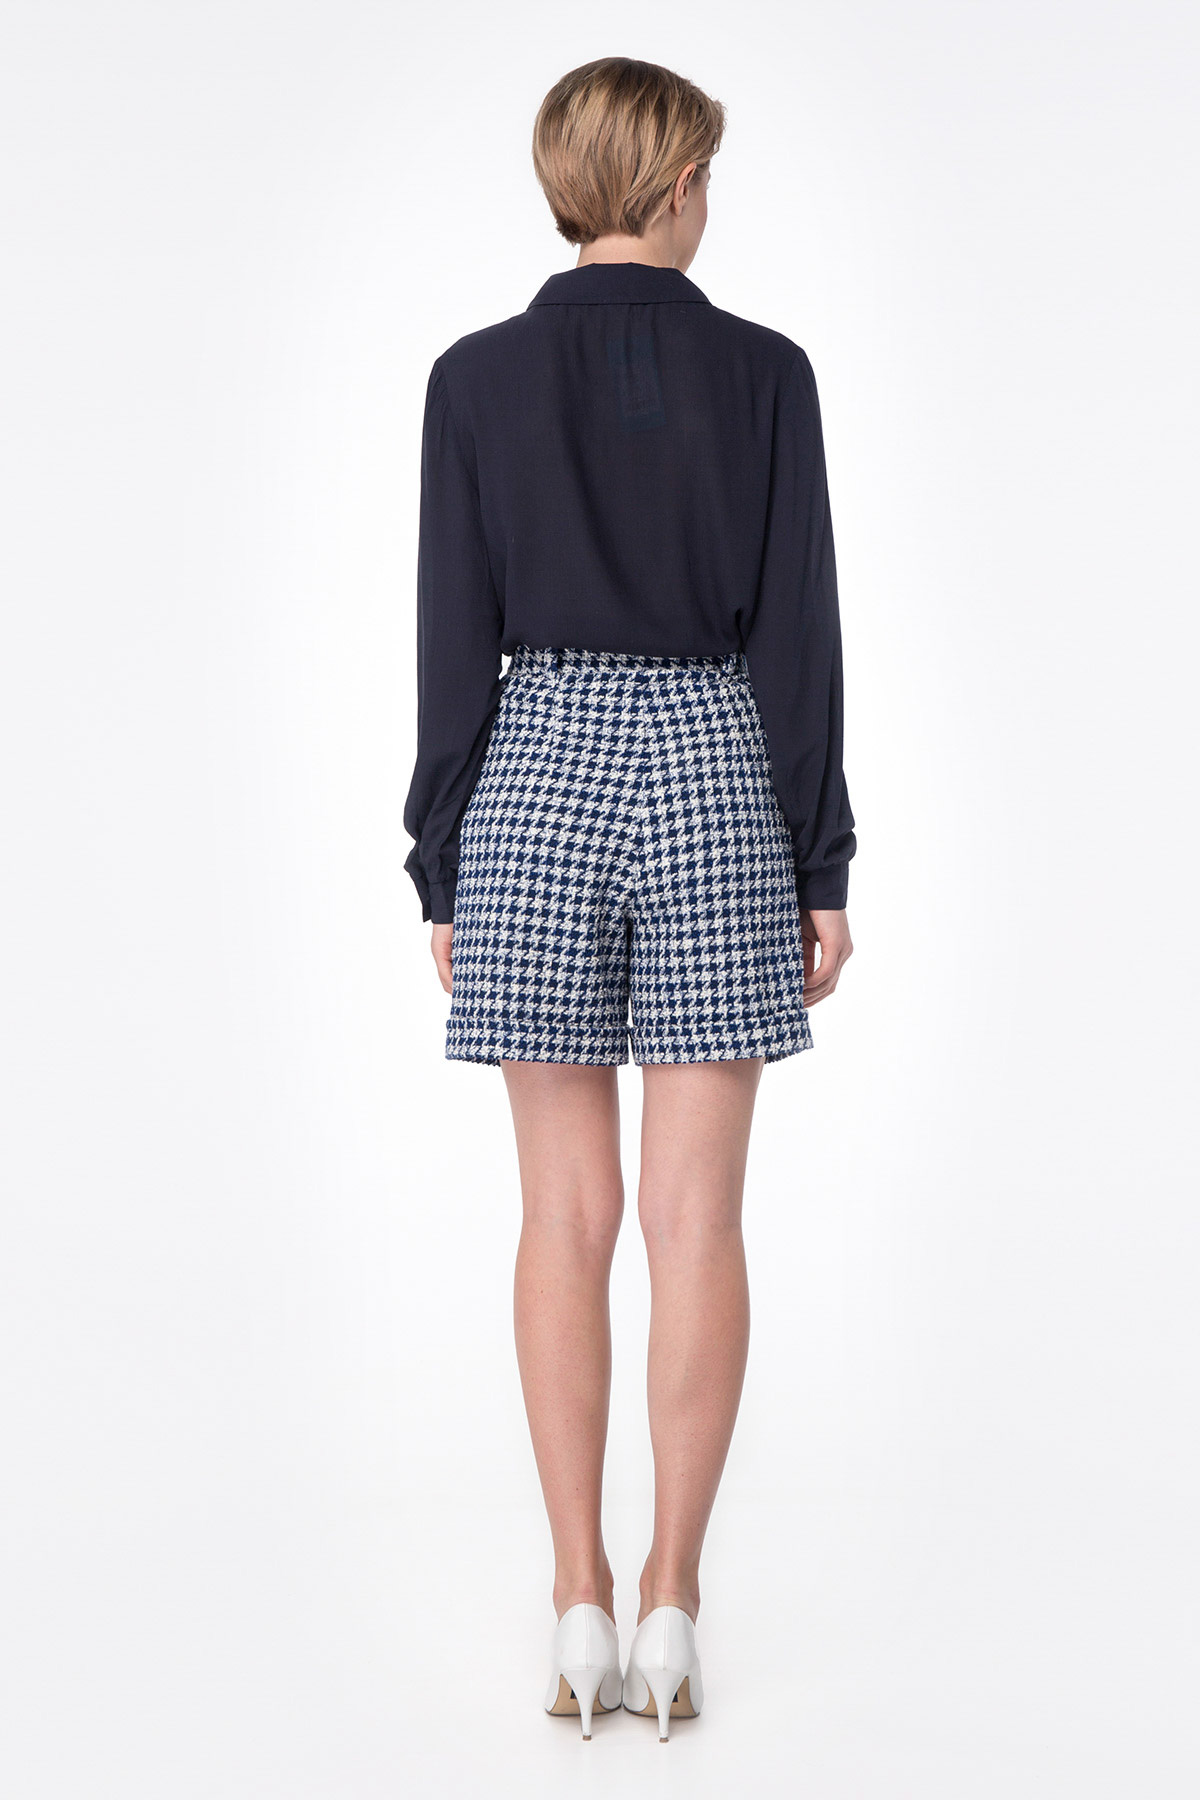 Shorts with blue&white houndstooth print, photo 10